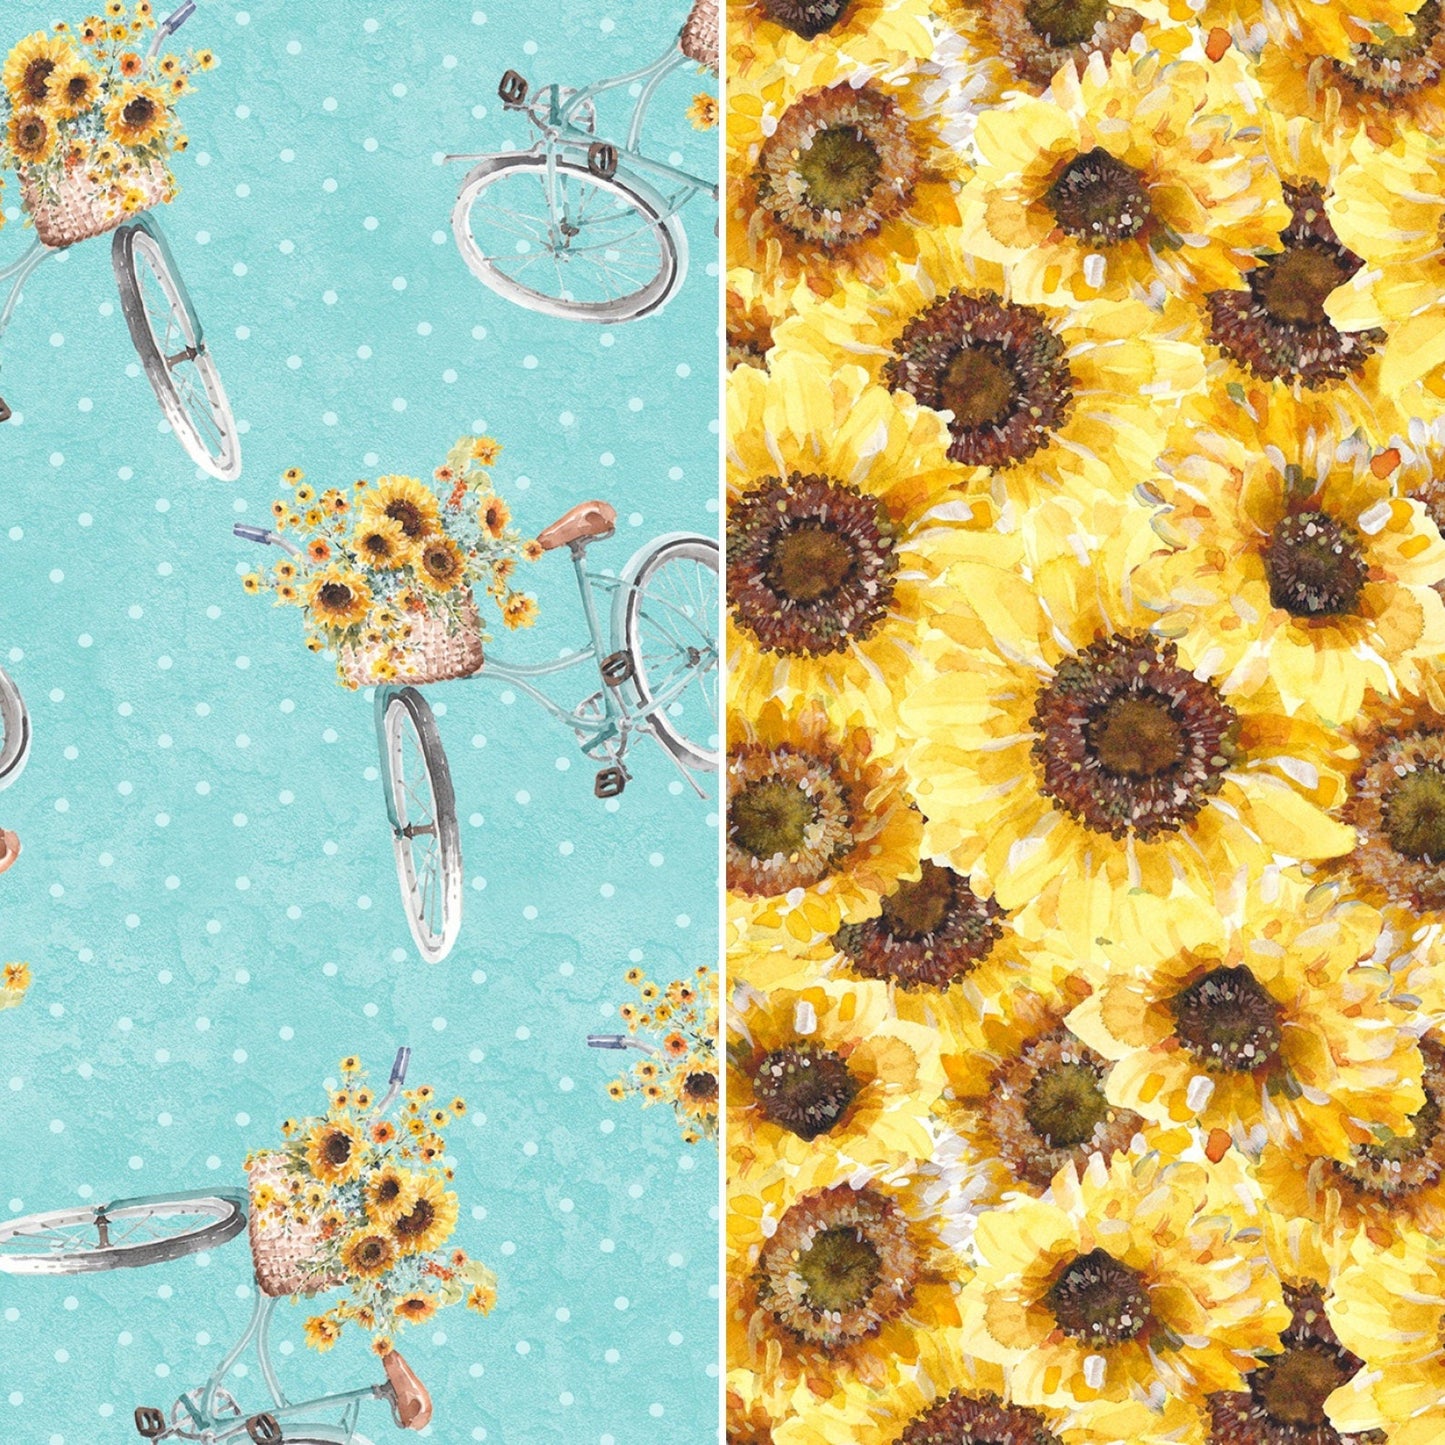 Wilmington Prints Bicycles on light teal or Packed Sunflowers Fabric by the Yard from Wilmington Prints Sunflower Sweet by Lisa Audit